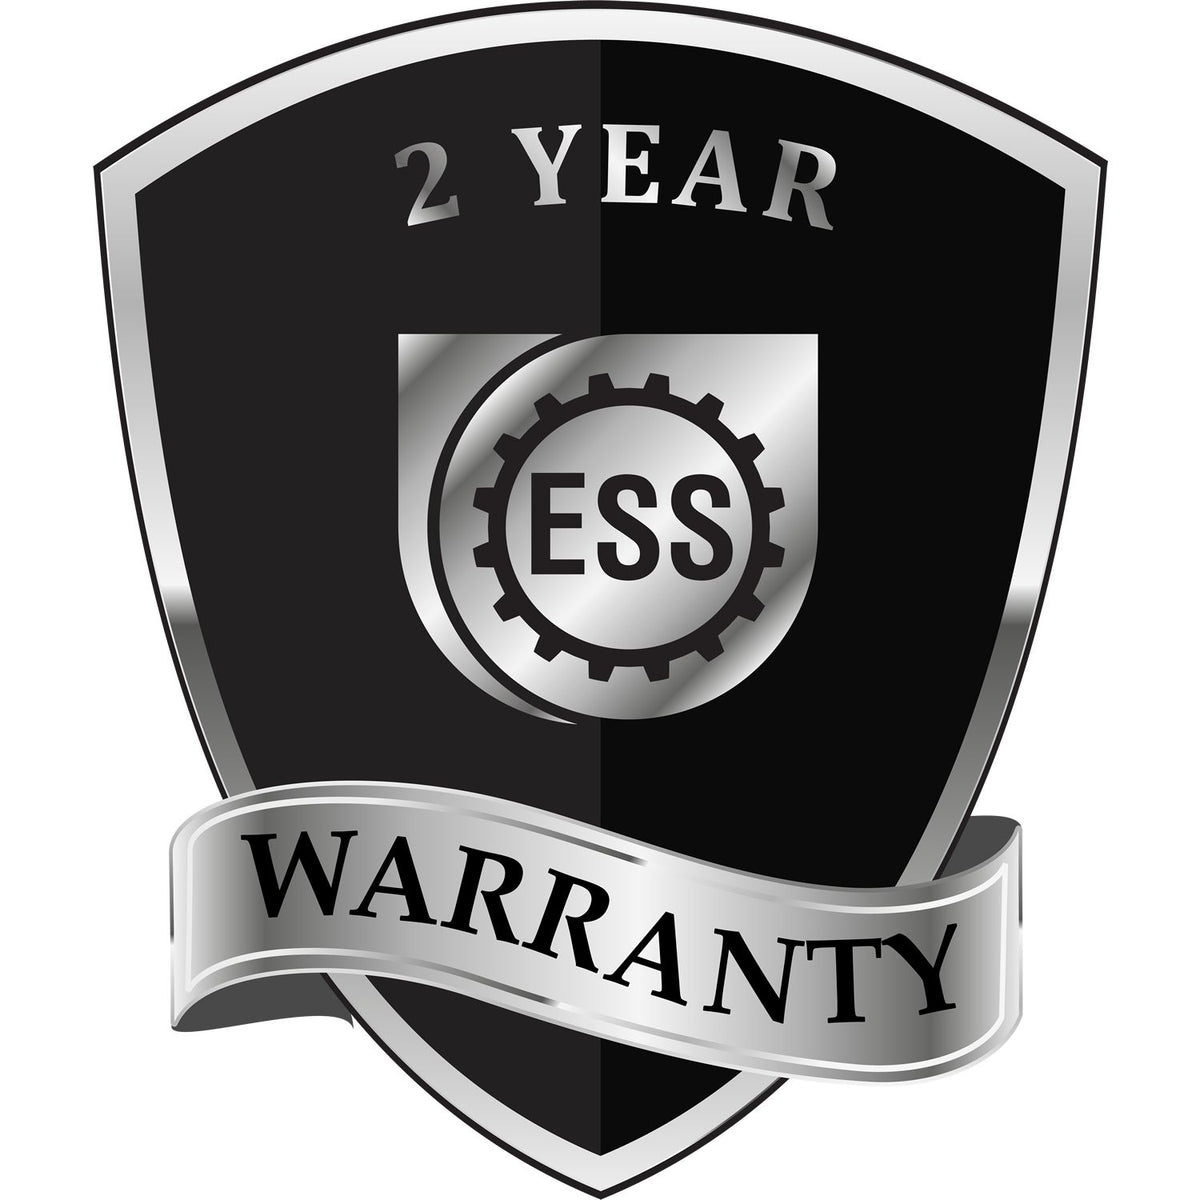 A badge or emblem showing a warranty icon for the Extended Long Reach Utah Architect Seal Embosser